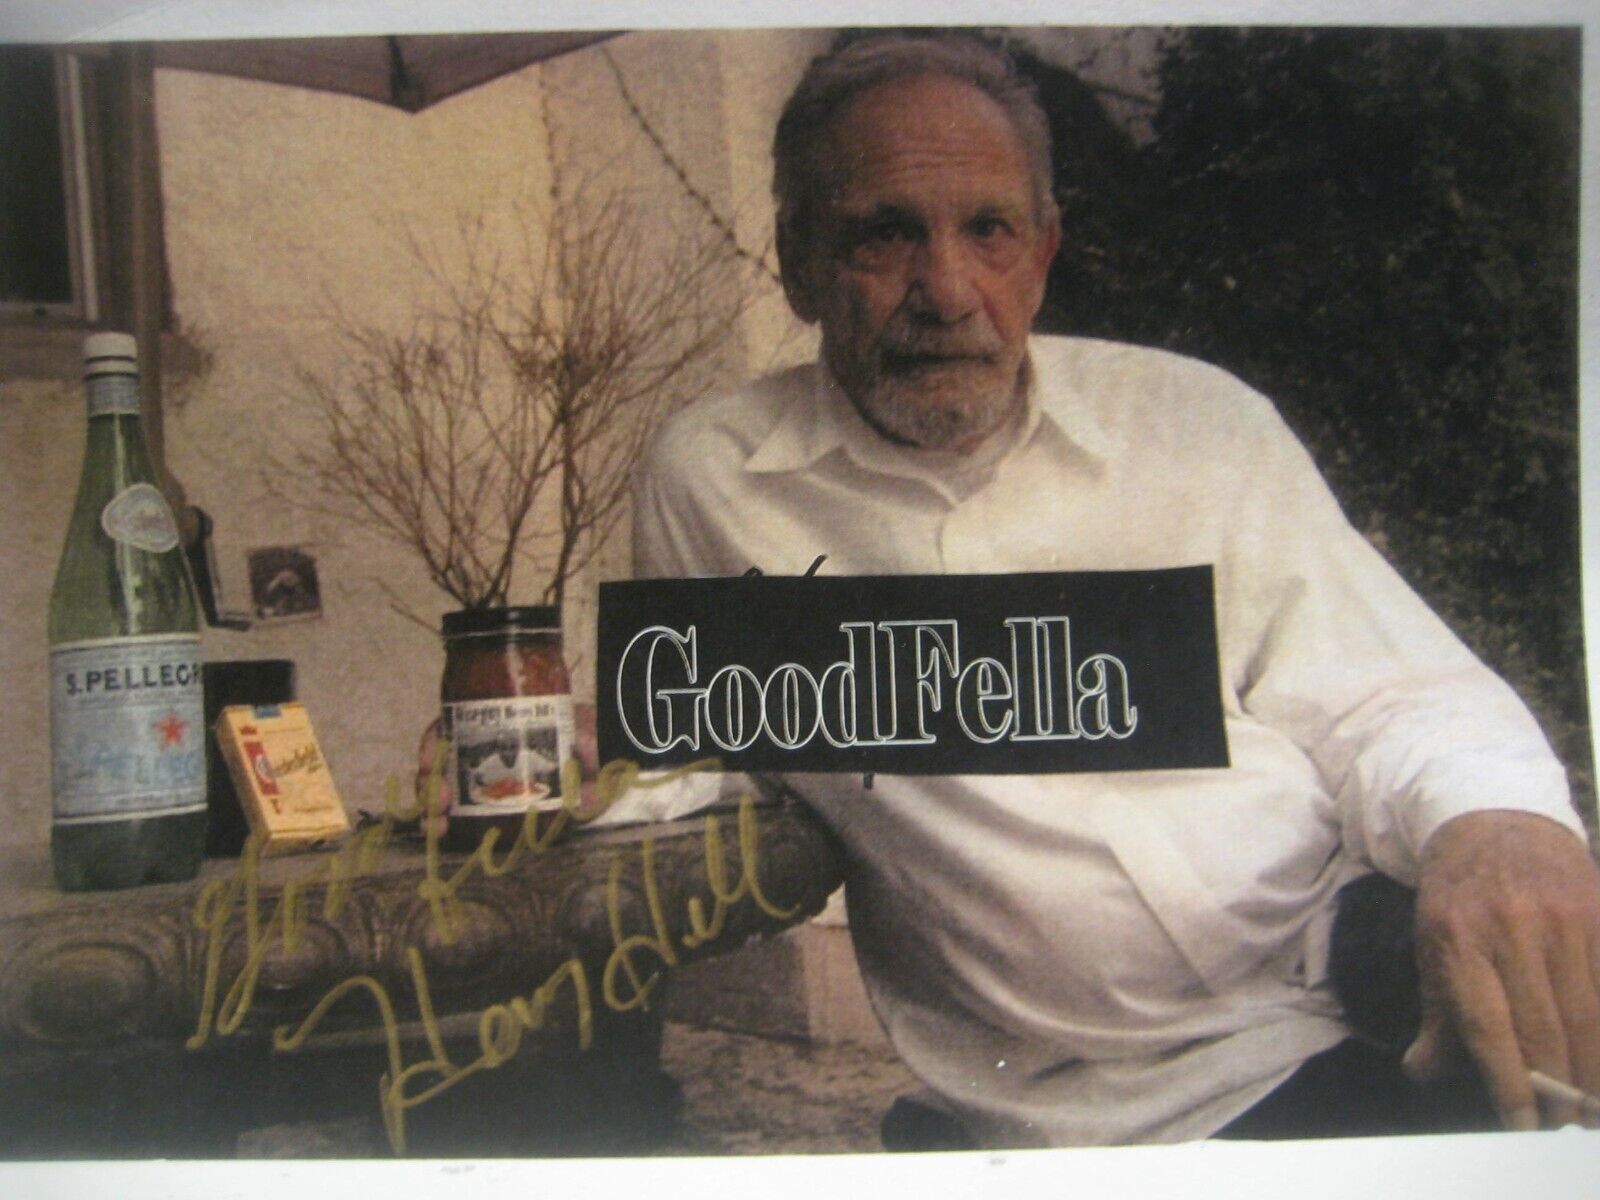 HENRY HILL GOODFELLA MOBSTER AUTOGRAPHED ADVERTISMENT FOR HIS SAUCE COMPANY 8X10